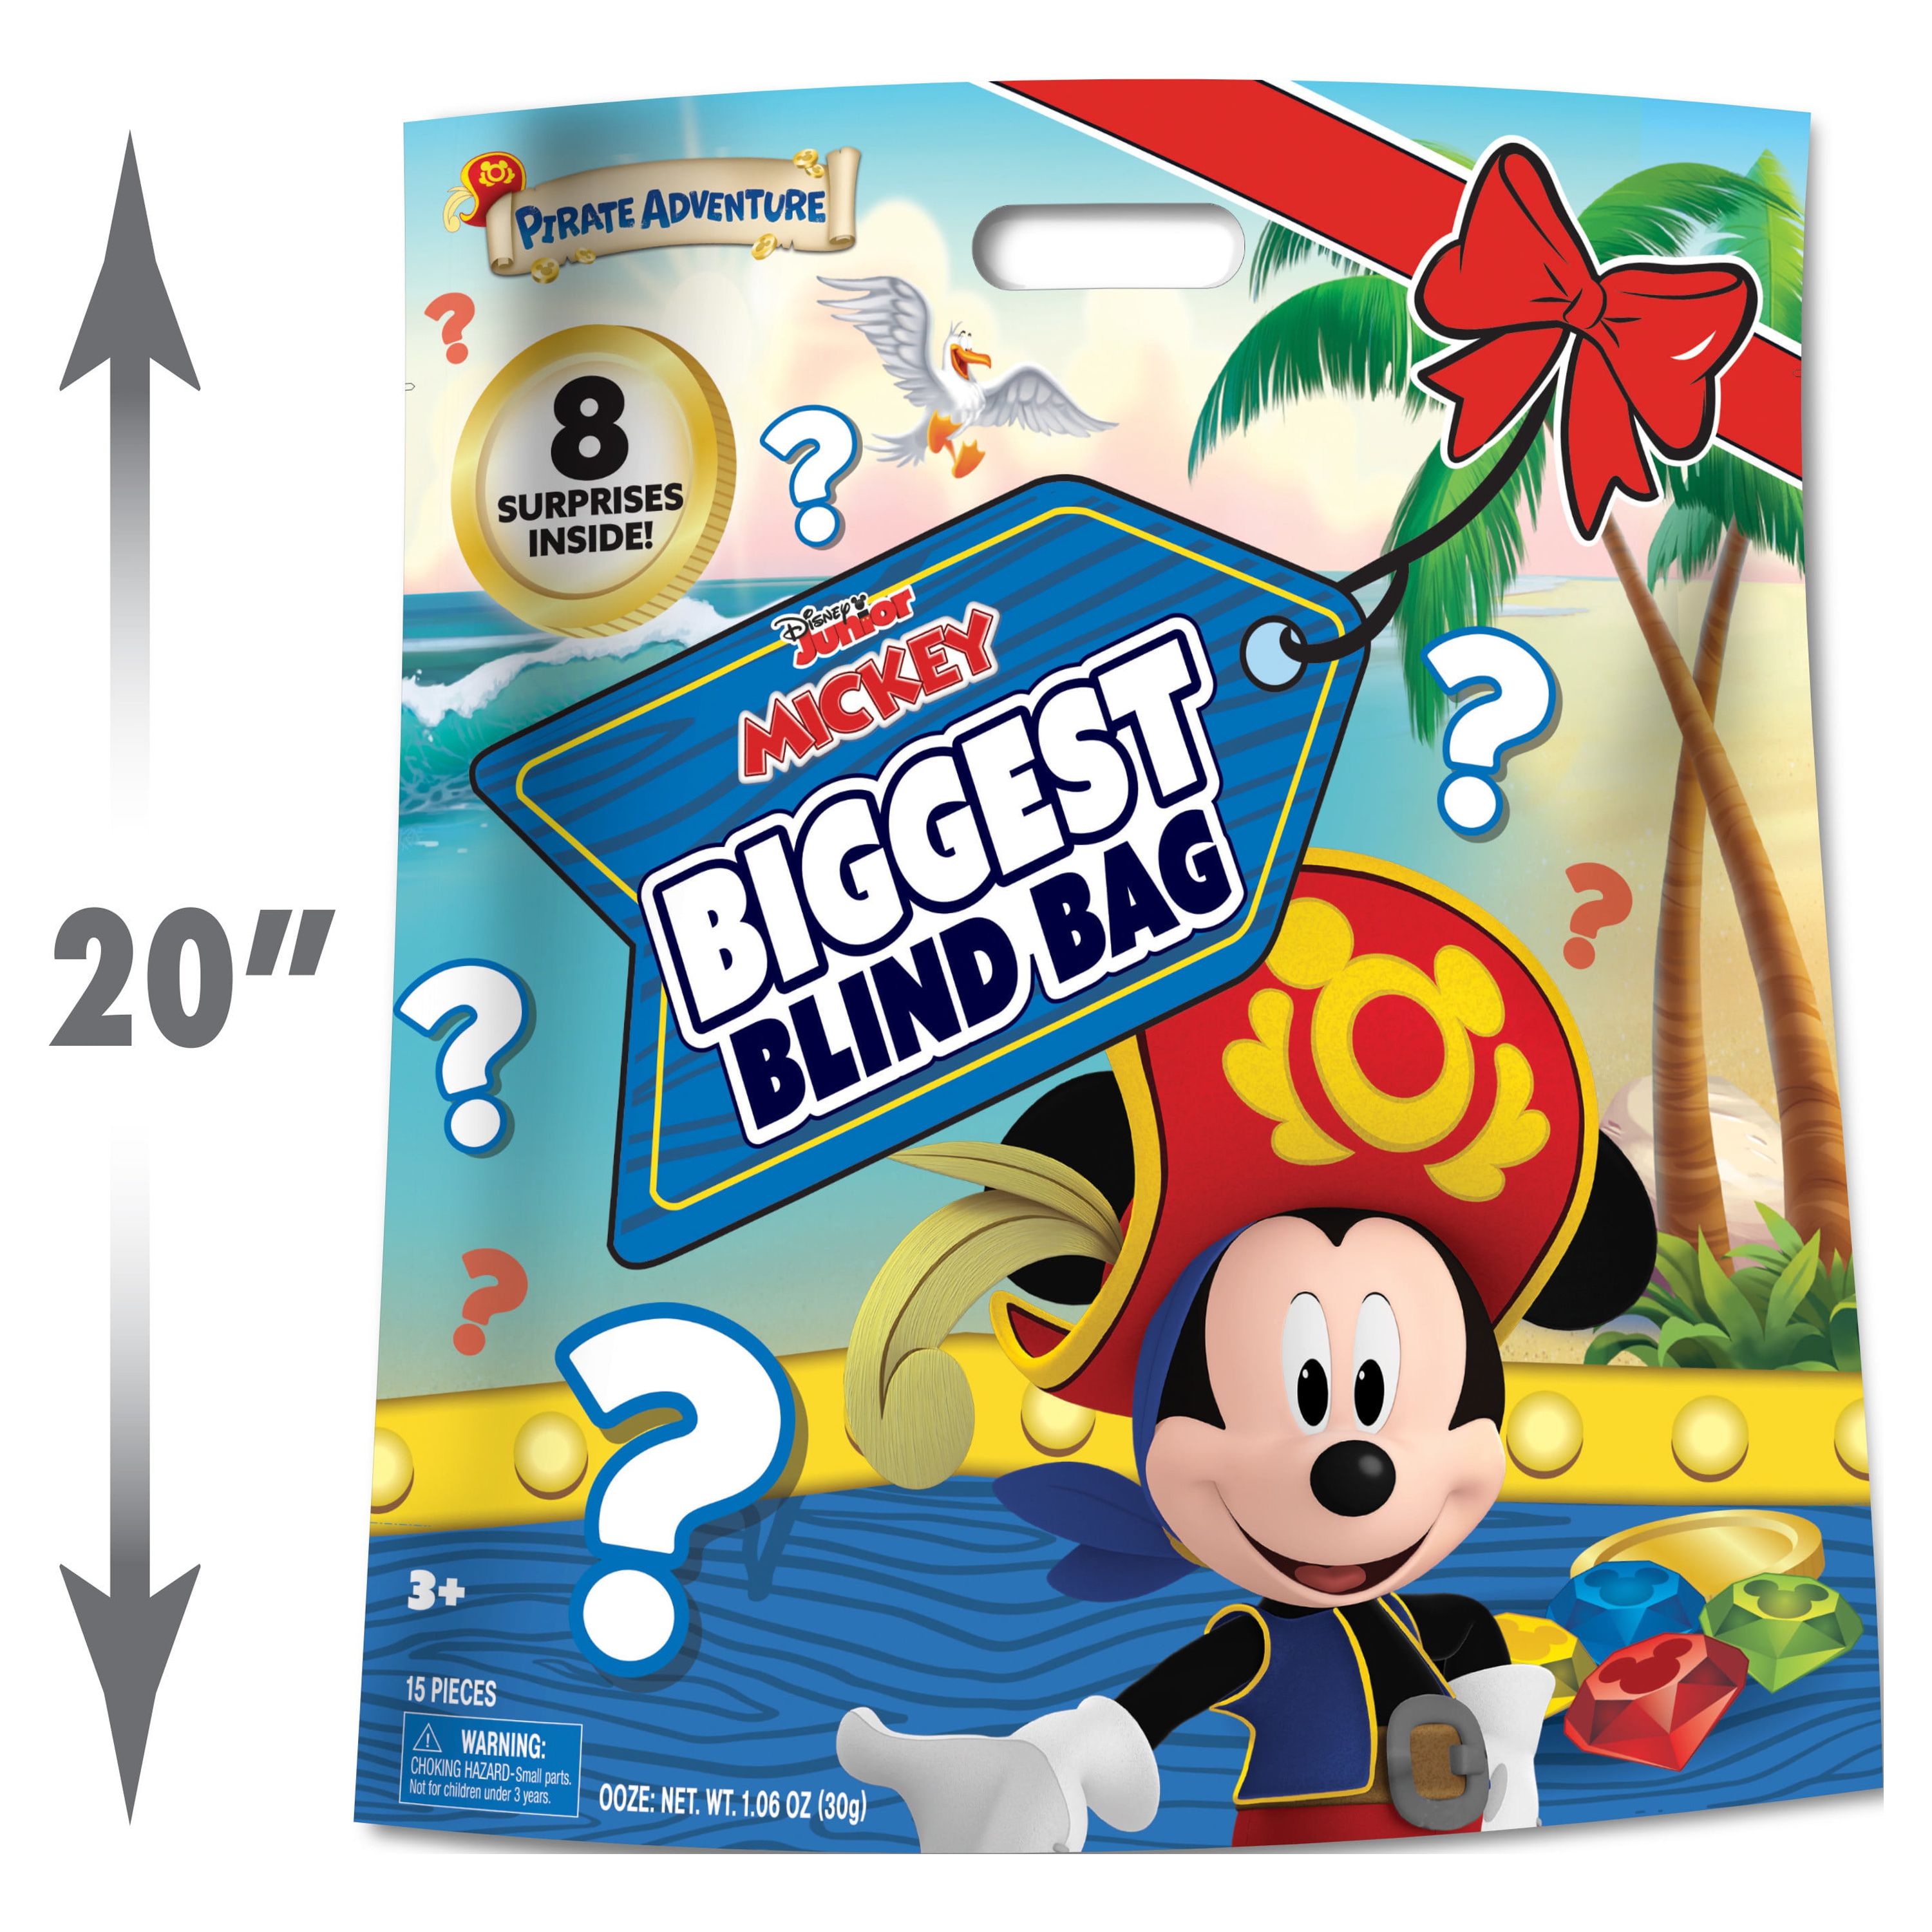 Disney Junior Mickey Mouse Pirate Adventure Biggest Blind Bag, Officially Licensed Kids Toys for Ages 3 Up, Gifts and Presents - image 5 of 5